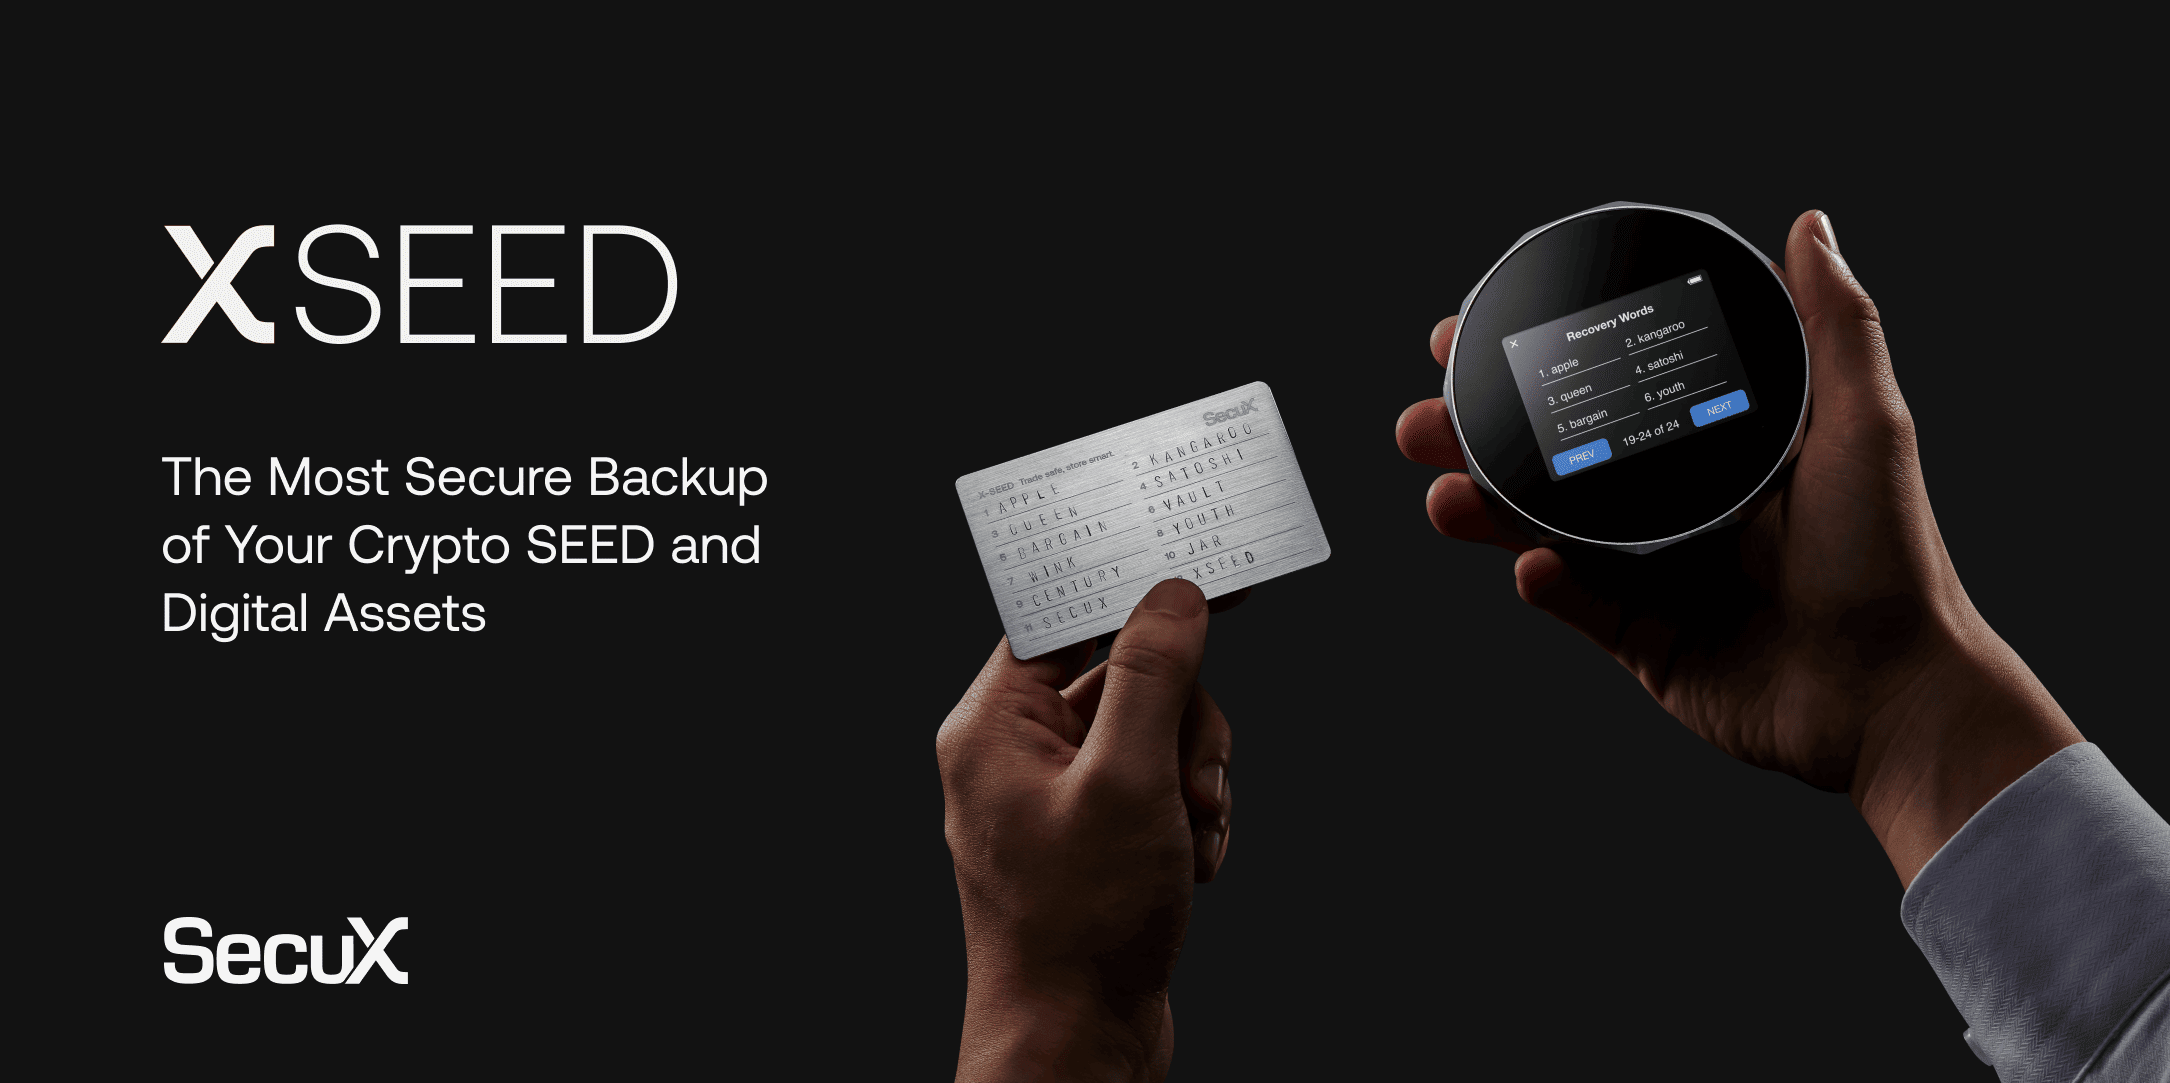 X SEED %E2%80%93 the Most Secure Backup of Your Crypto SEED and Digital Assets